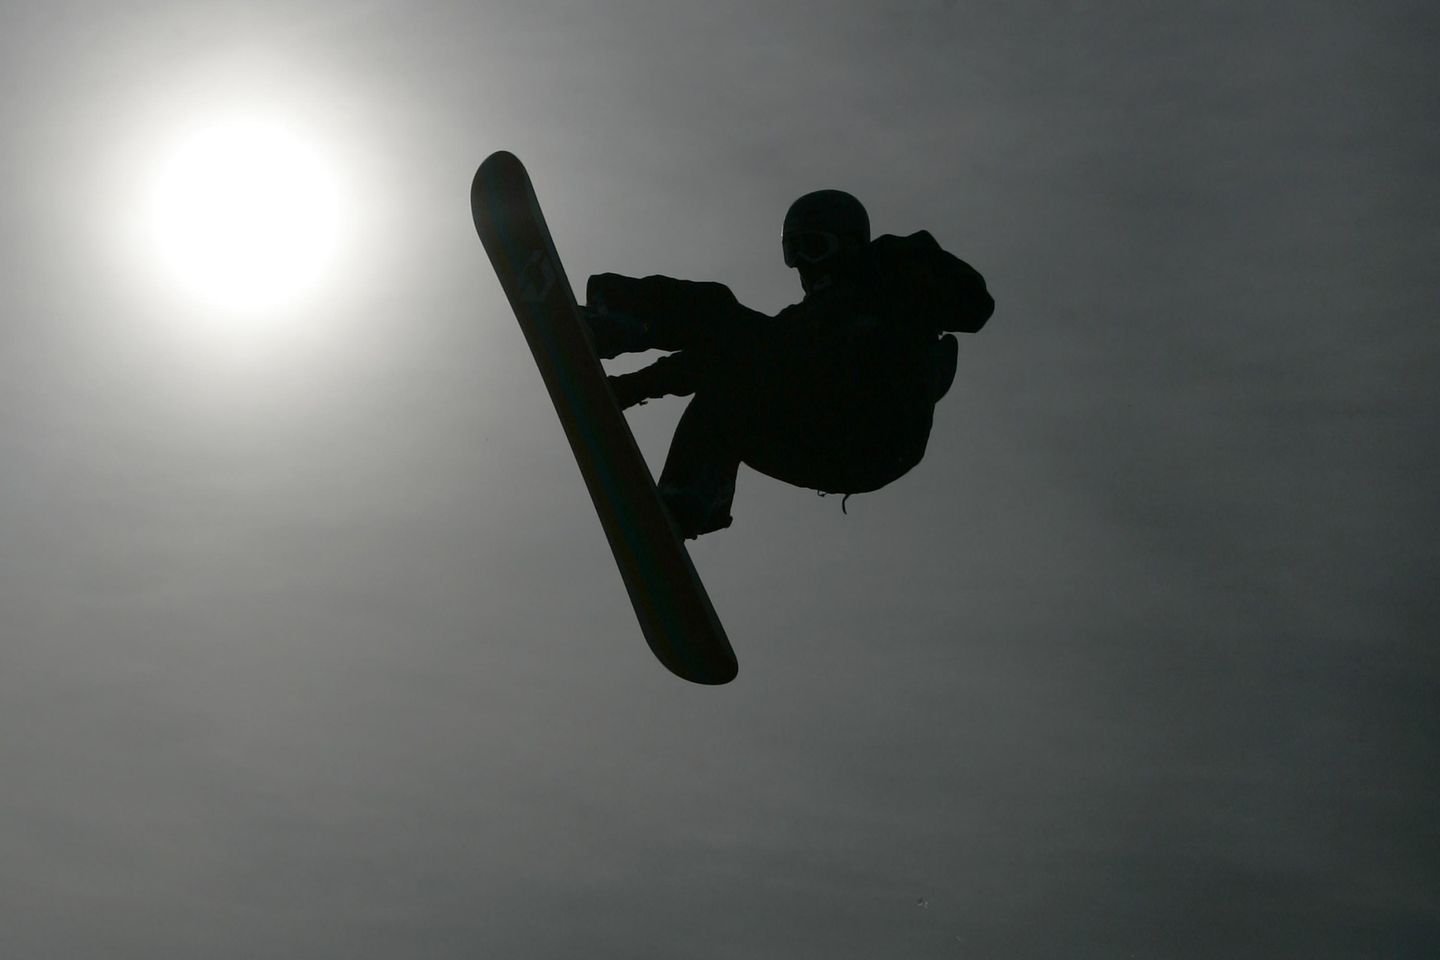 Snowboarding coach, fired over comments on transgender athletes, settles case for $75,000
